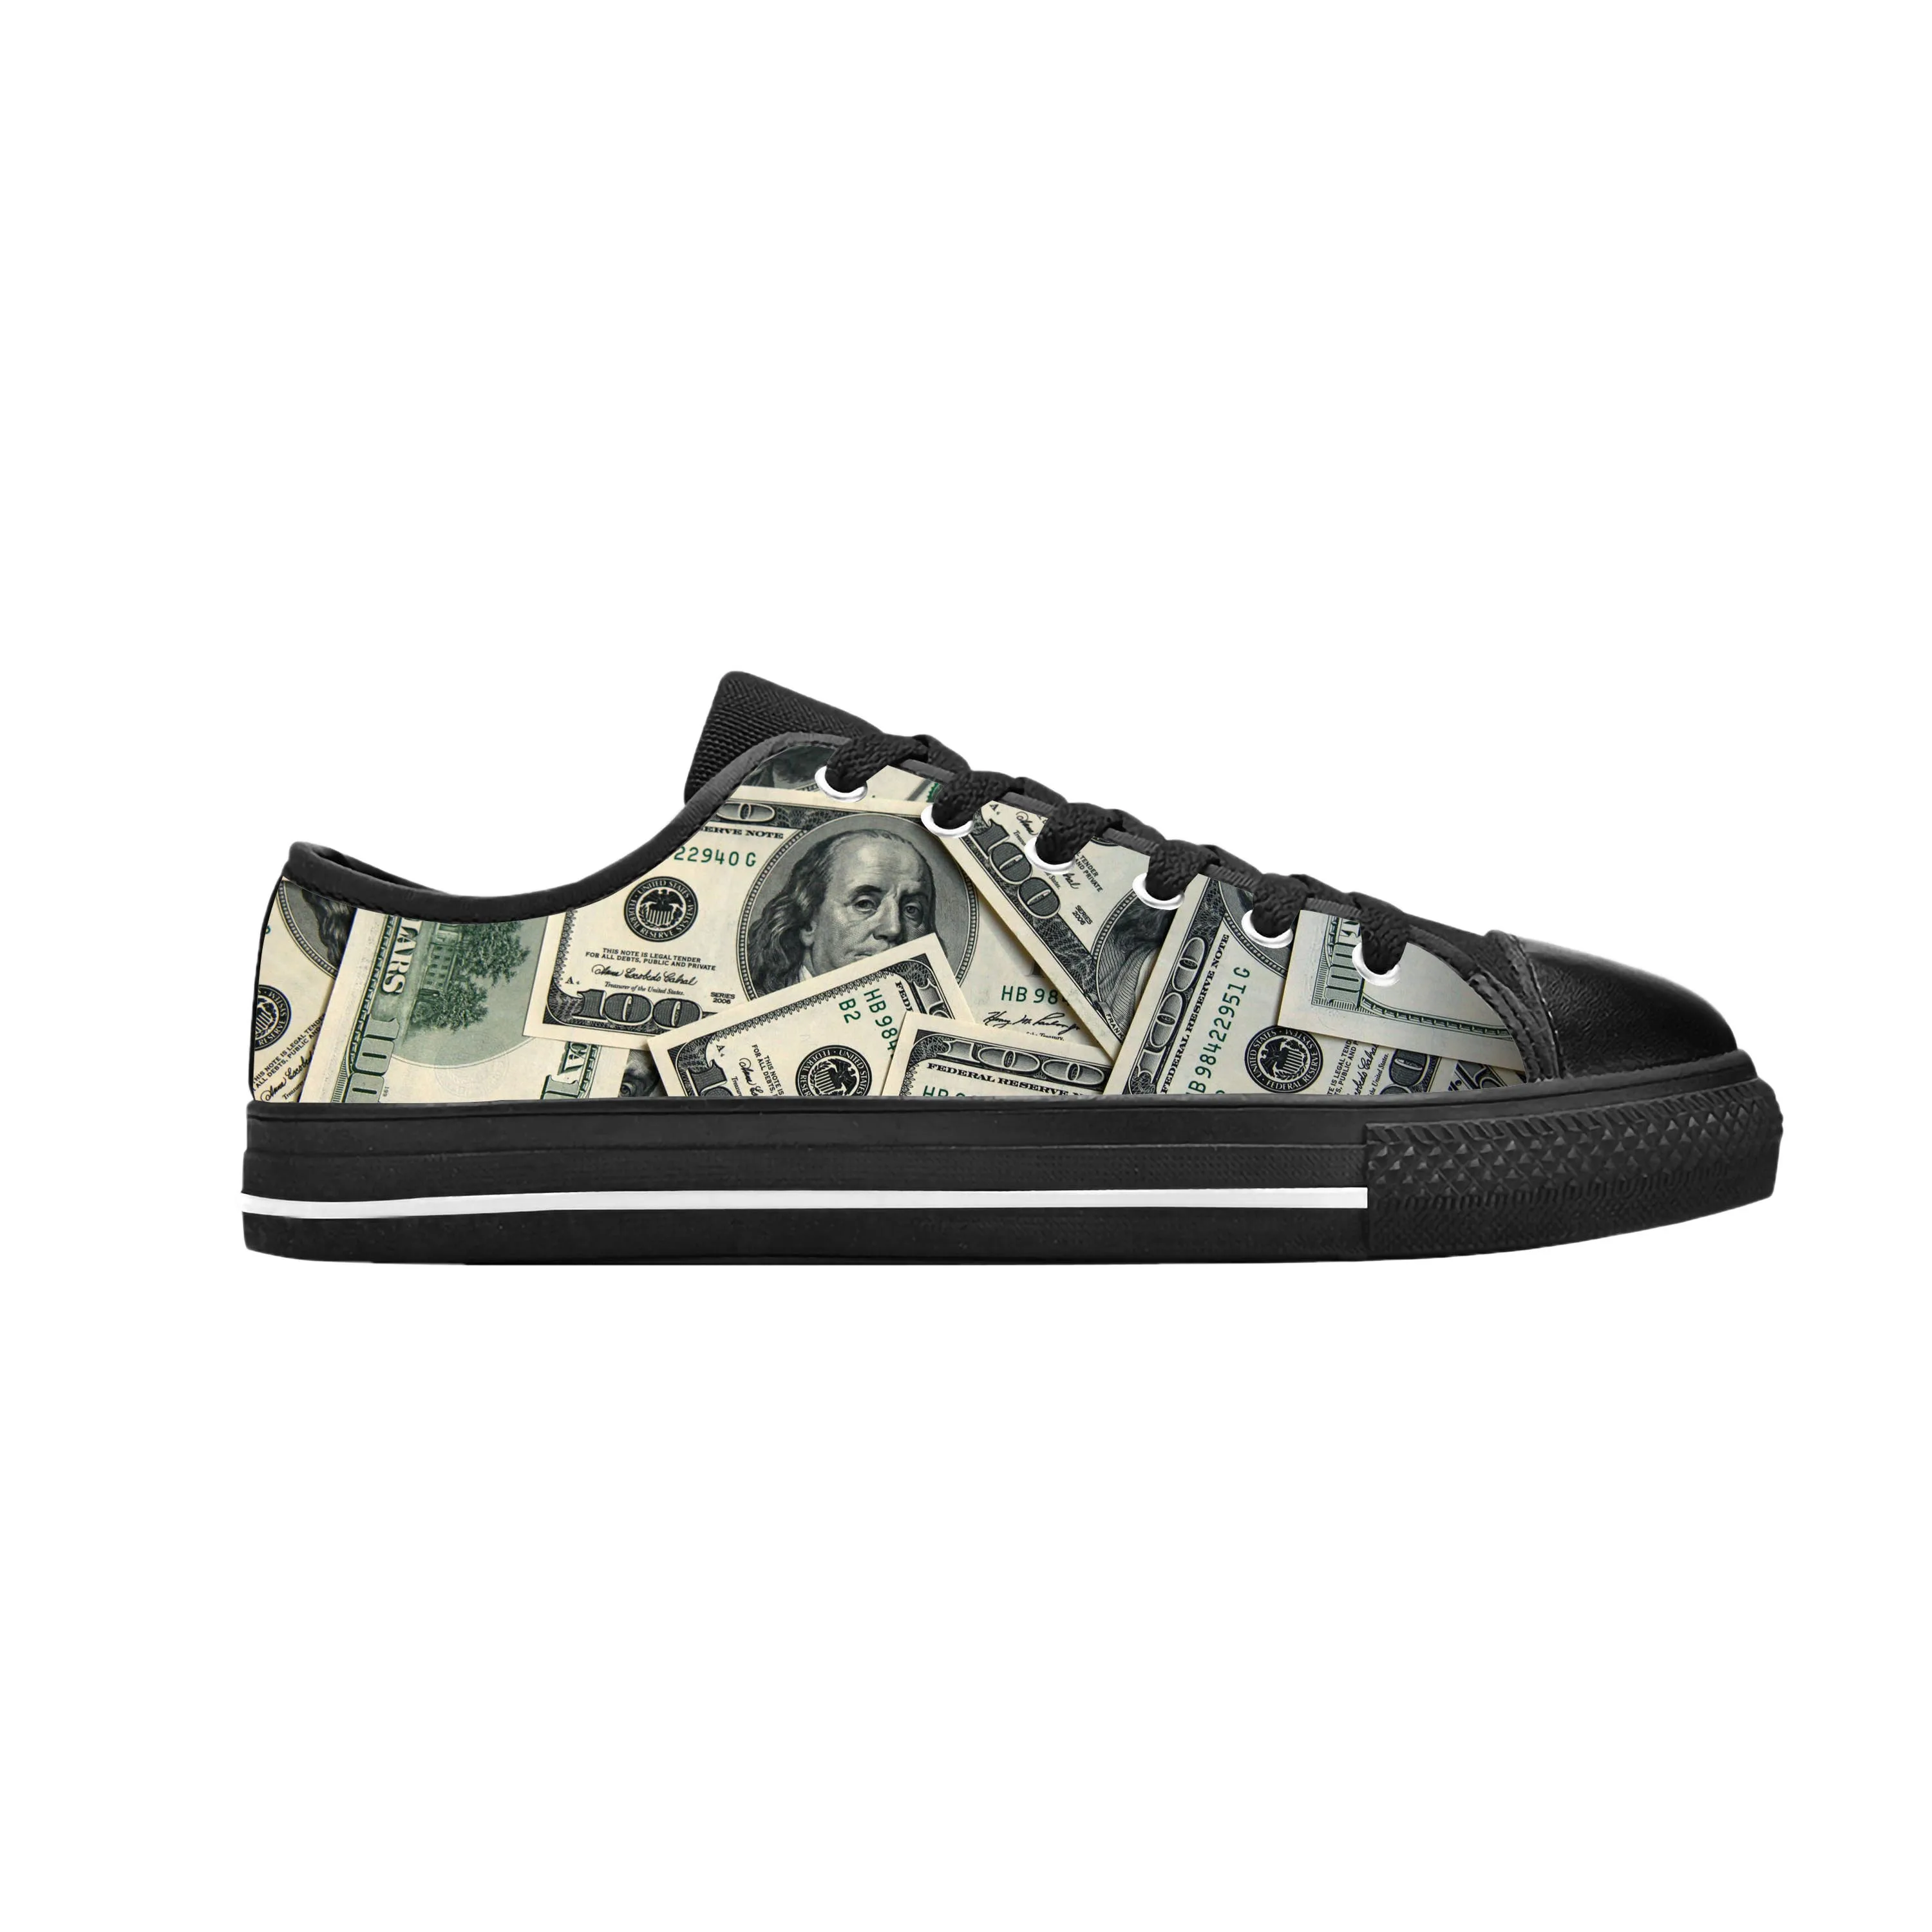 Gothic Dollar Bills Dollars Money Pattern Fashion Casual Cloth Shoes Low Top Comfortable Breathable 3D Print Men Women Sneakers